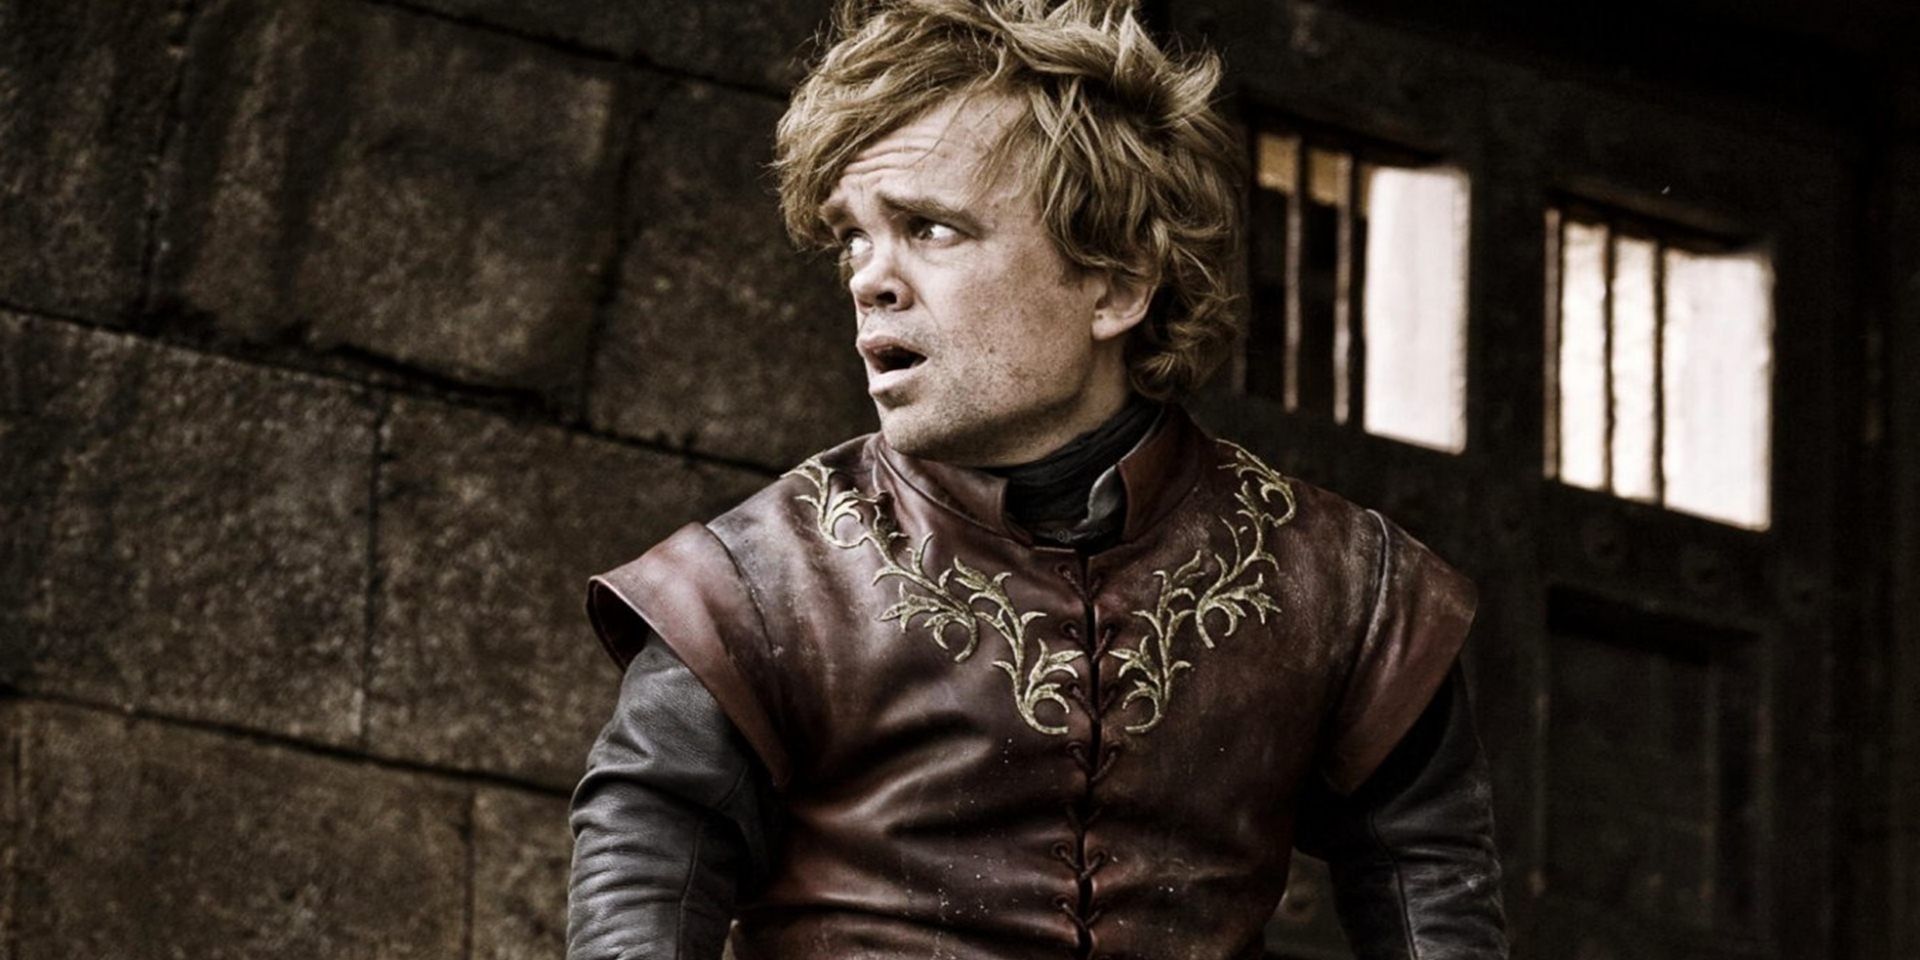 Tyrion Lannister - 13 Characters Most Likely to Die in Game of Thrones Season 6